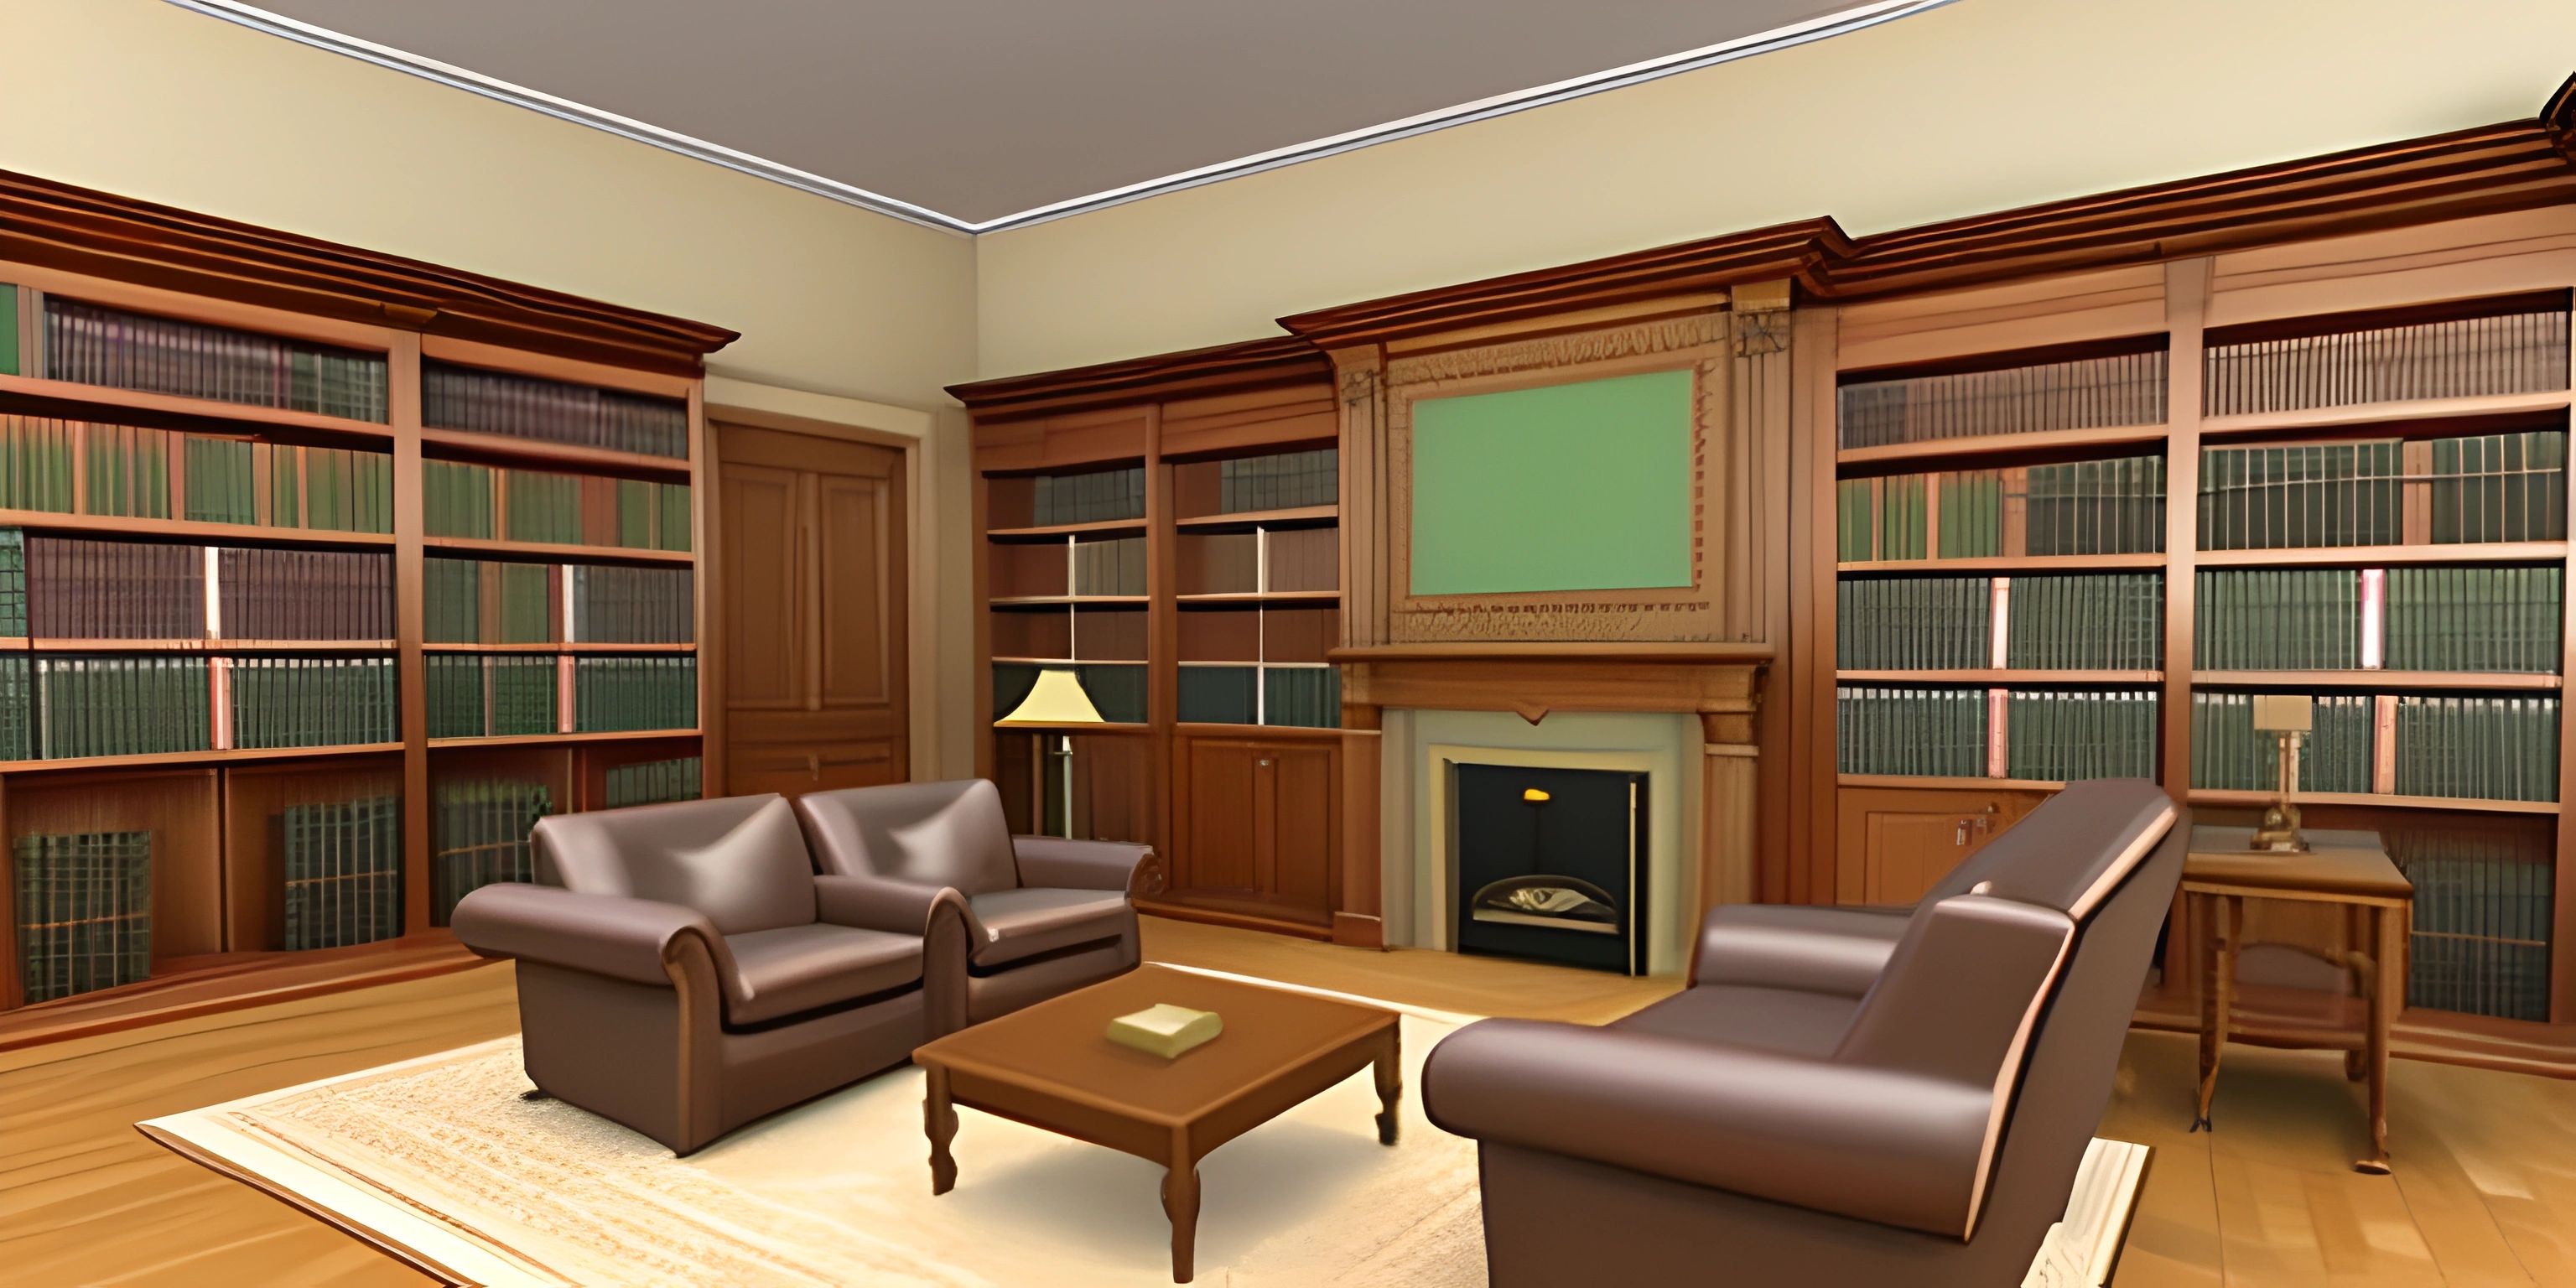 the office has books on two shelves and a fireplace and chairs with wood furniture around it